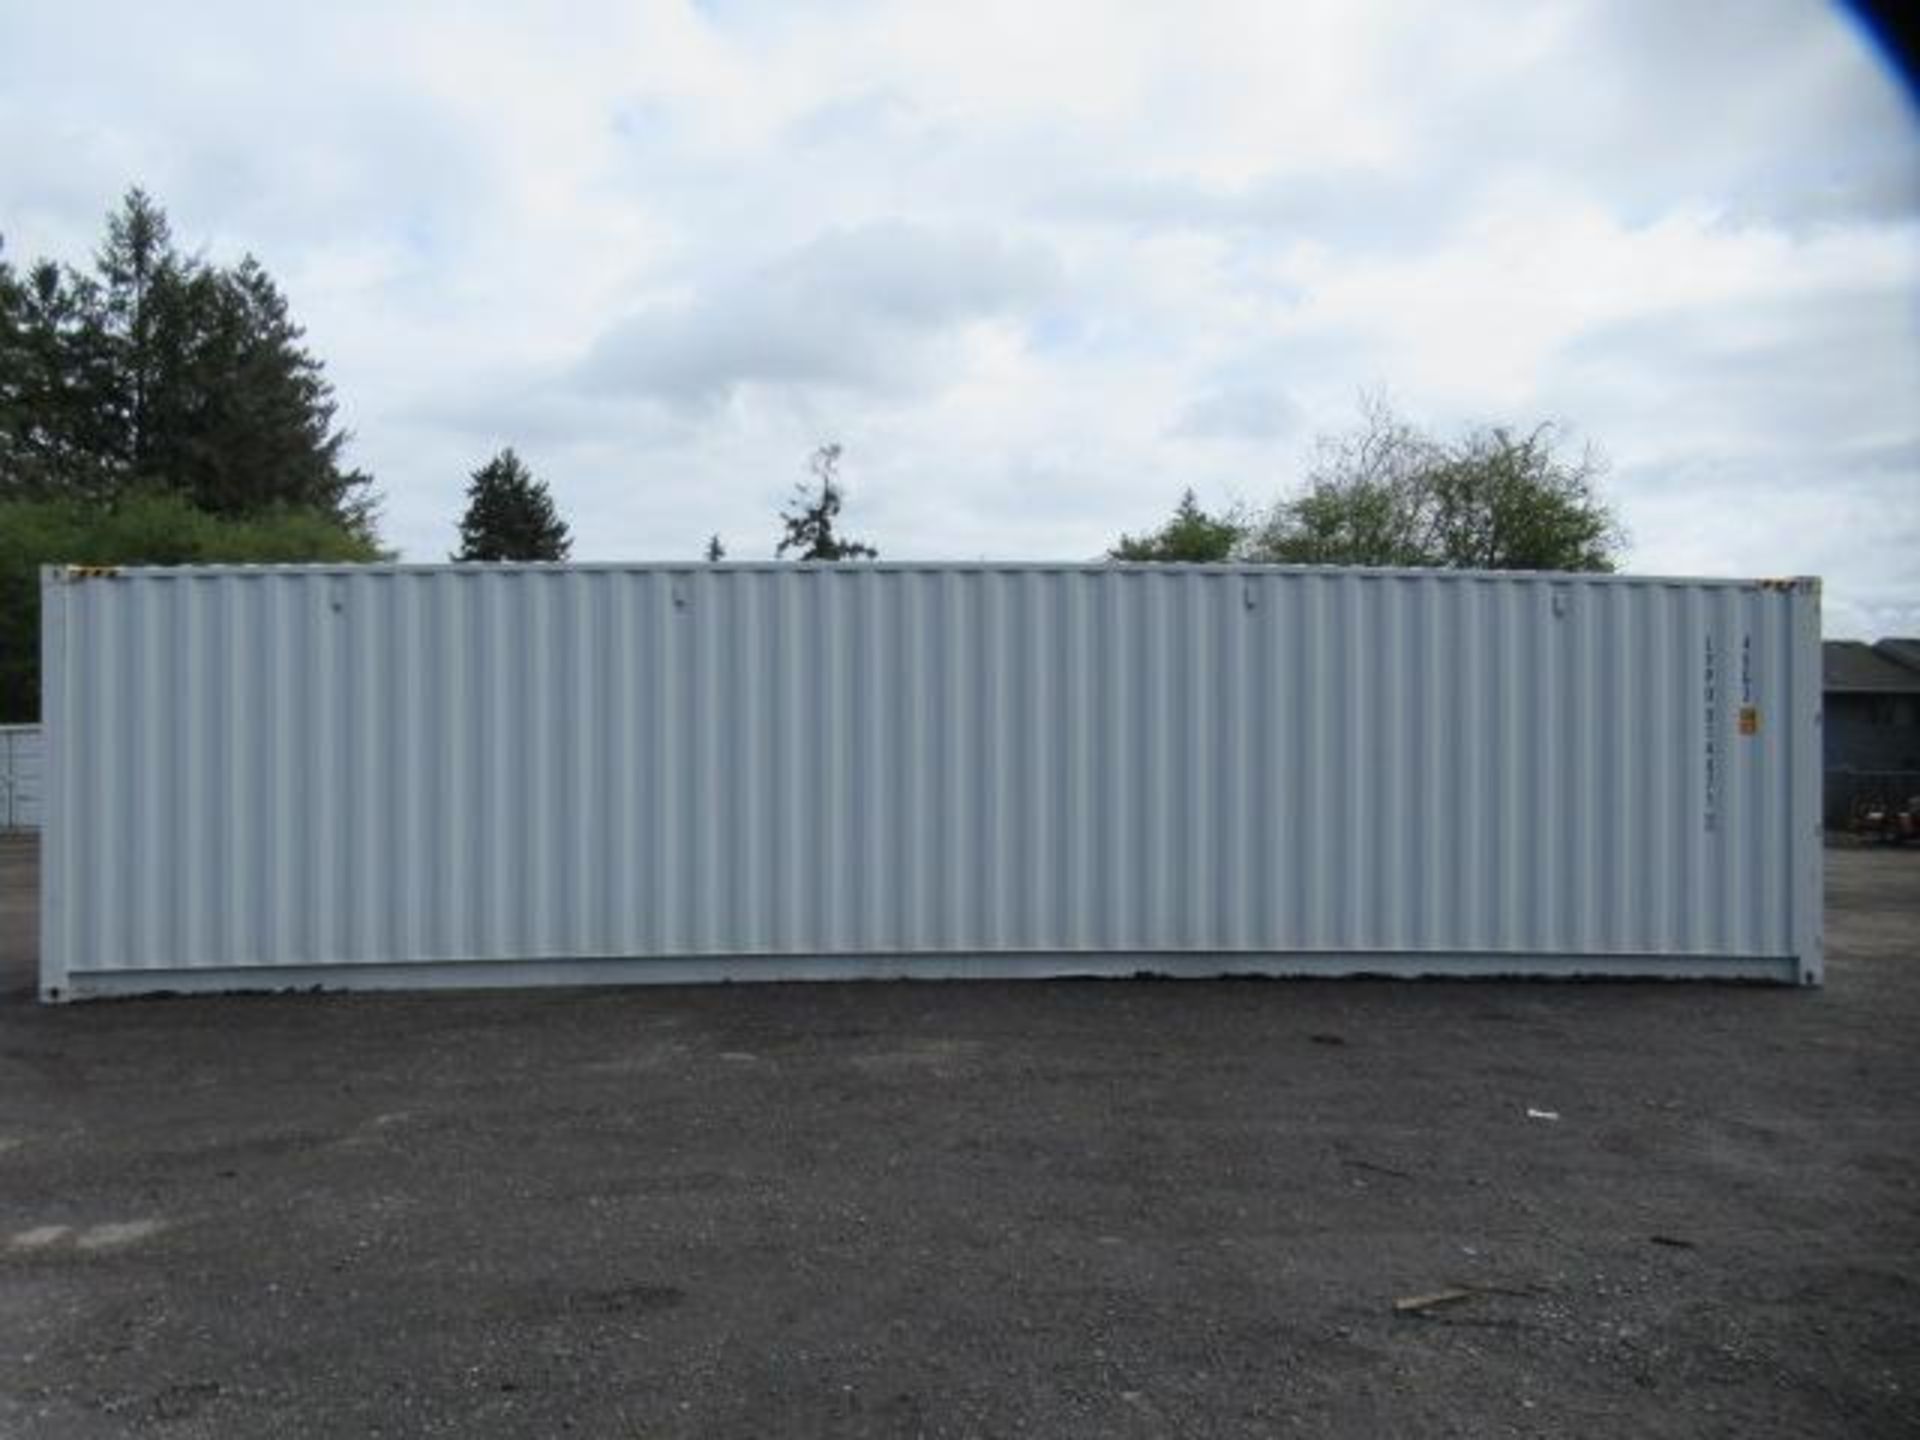 2024 40' HIGH CUBE SHIPPING CONTAINER W/ (2) SIDE DOORS, SER#: LYPU0144711 (UNUSED) - Image 3 of 6